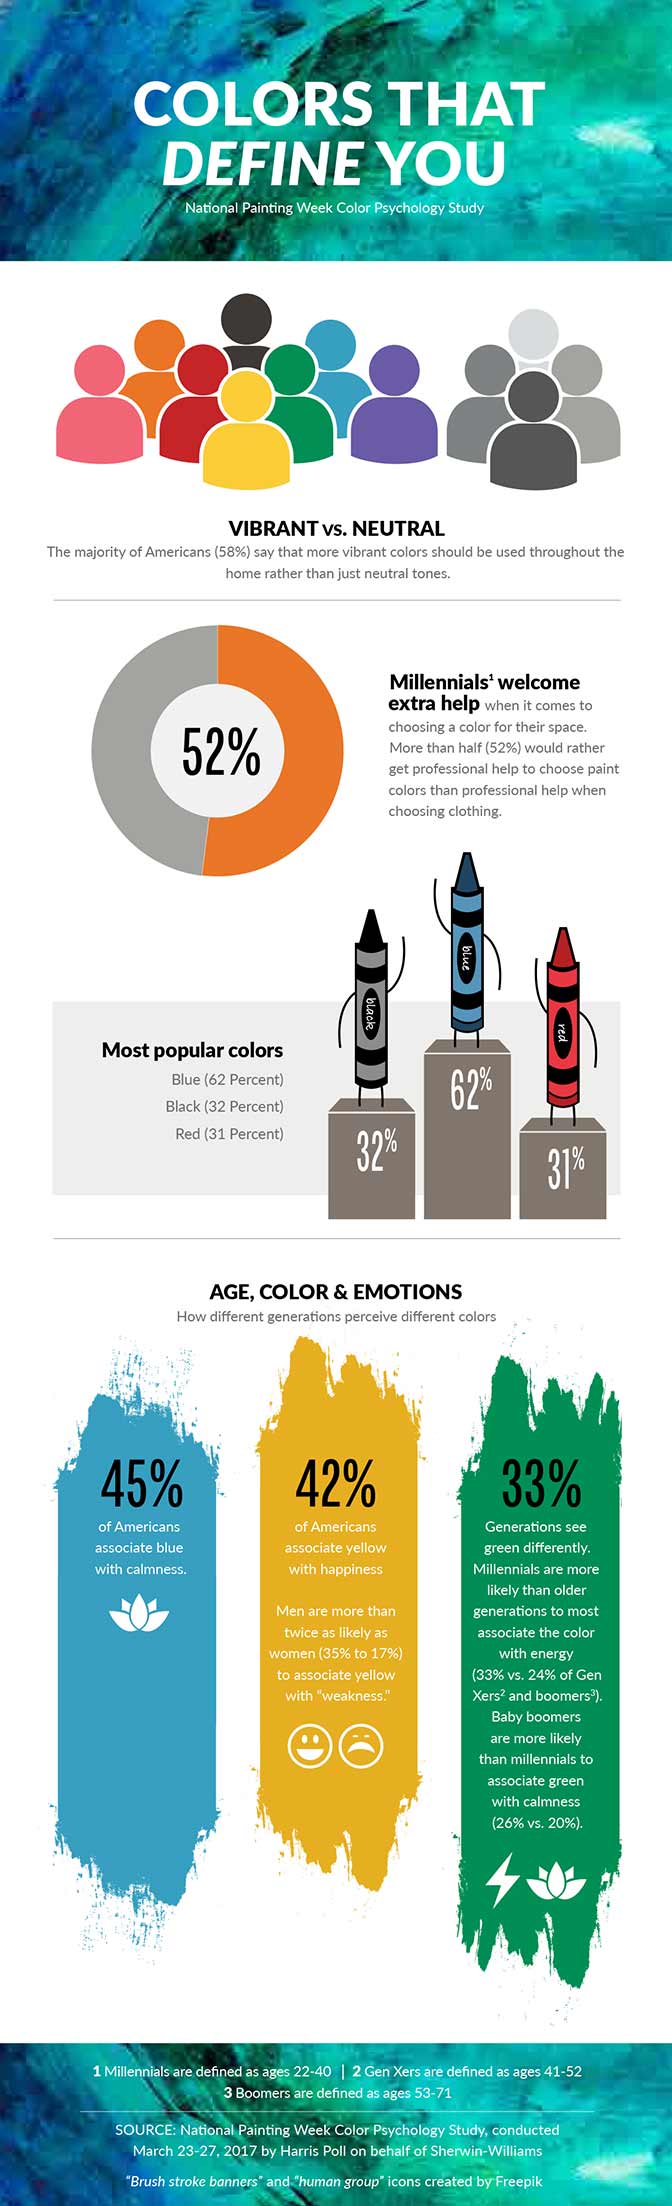 infographic of 2017 National Painting week survey: Vibrant vs Neutral - 58% of Americans say that more vibrant colors should be used throughout the home rather than just neutral tones. Millennials welcome extra help when it comes to choosing a color for their space. 52% would rather get professional help to choose paint colors than professional help when choosing clothing. Most popular colors - Blue 62%, Black 32%, Red 31%. Age, Color & Emotions - How different generations perceive different colors - 45% of Americans associate blue with calmness. 42% of Americans associate yellow with happiness. Men are more than twice as likely as women (35% to 17%) to associate yellow with weakness. Generations see green differently. Millennials are more likely than older generations to most associate the color with energy (33% vs. 24% of Gen Xers and boomers). Baby boomers are more likely than millennials to associate green with calmness (26% vs. 20%).